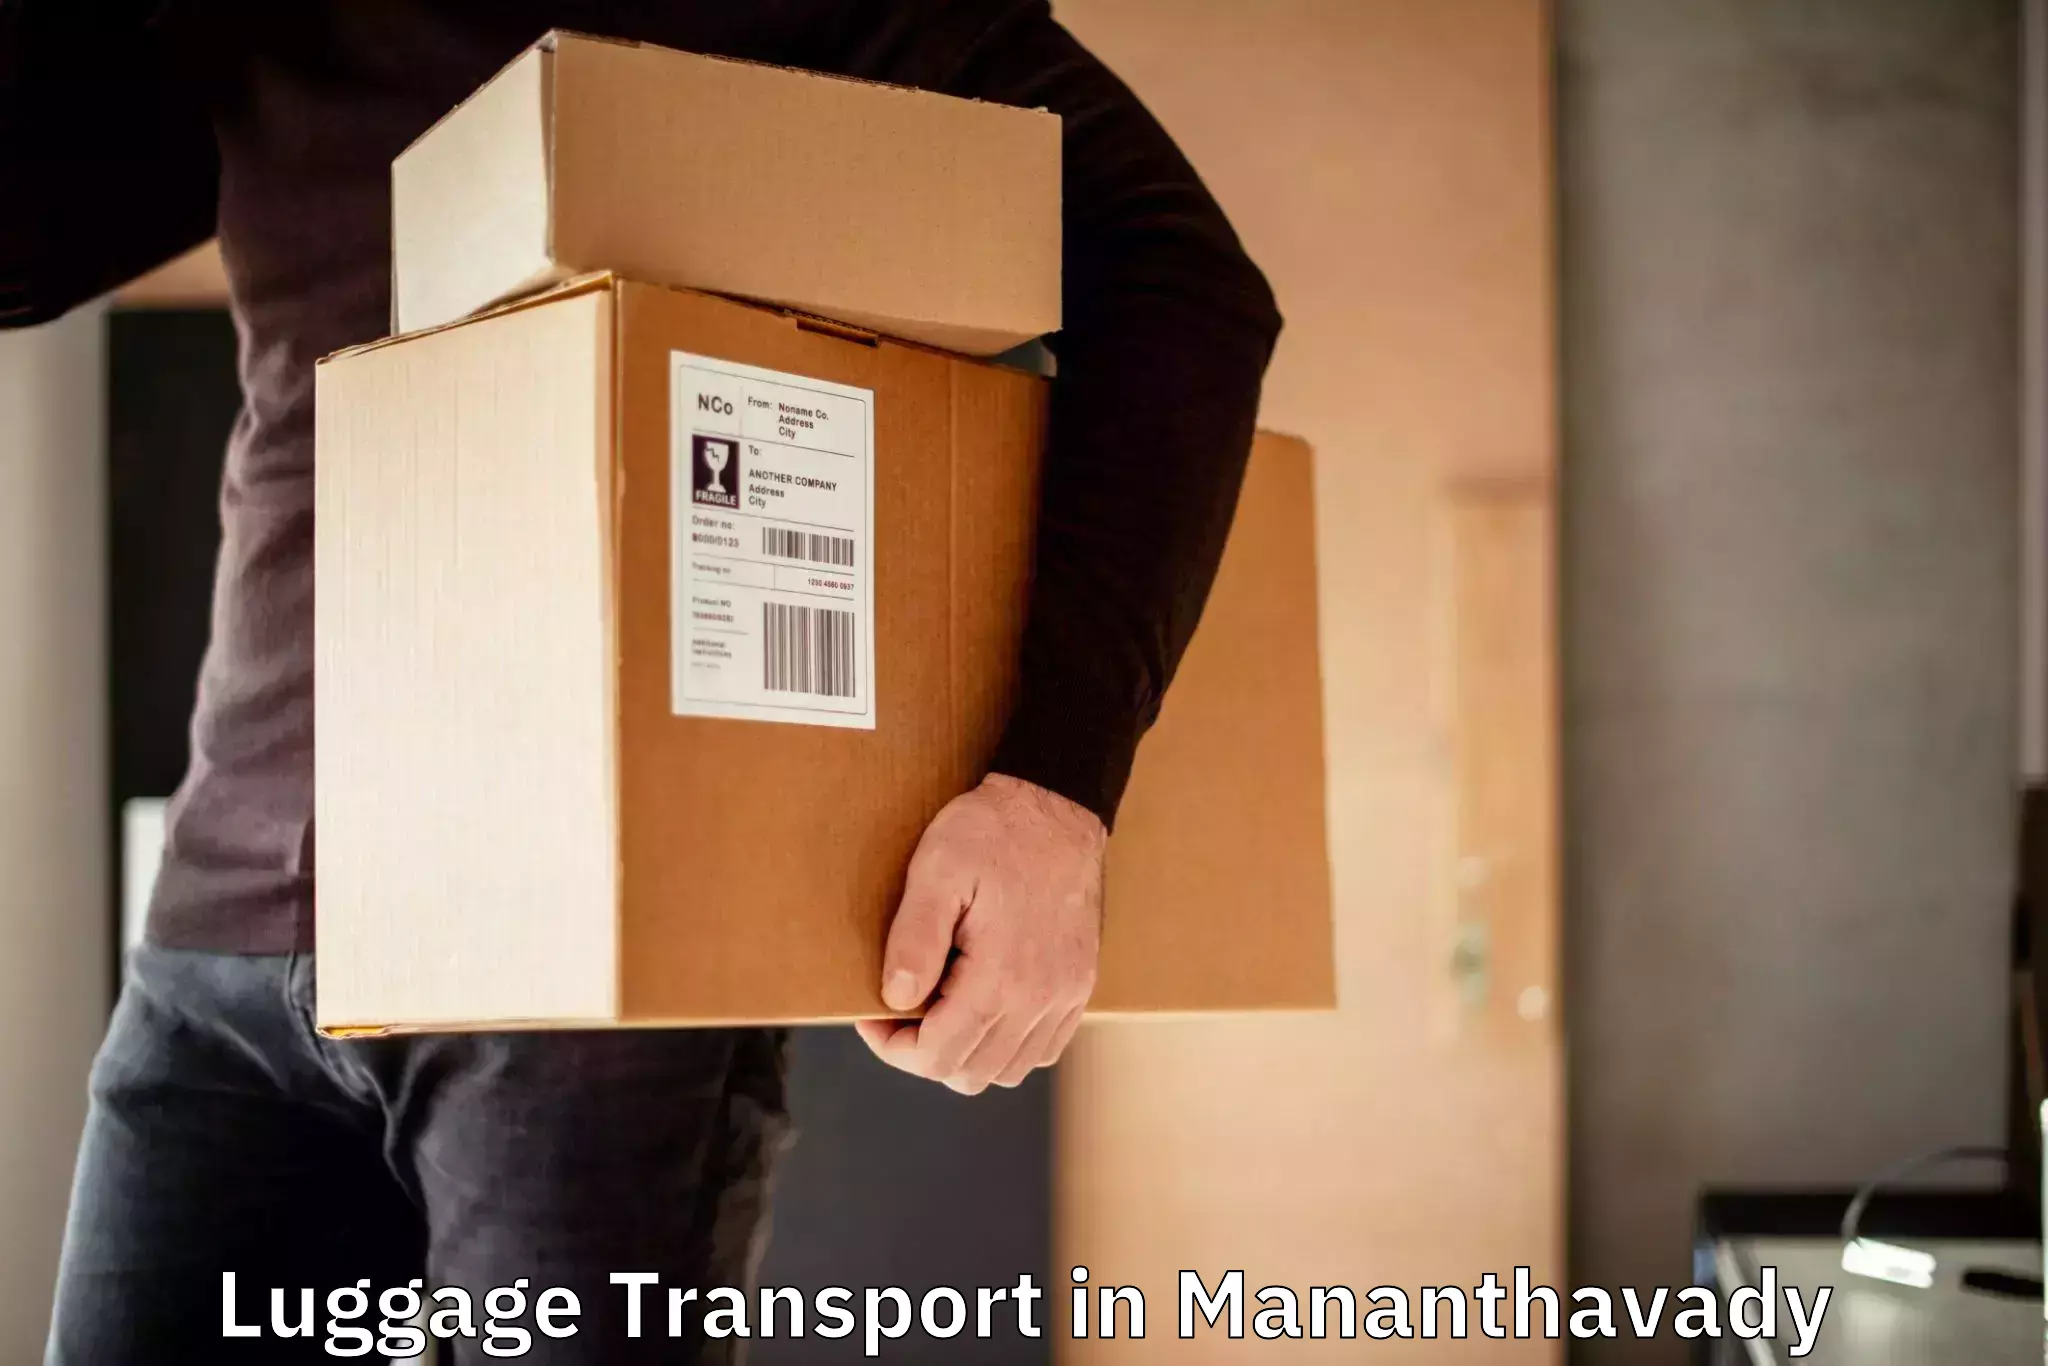 Luggage transport schedule in Mananthavady